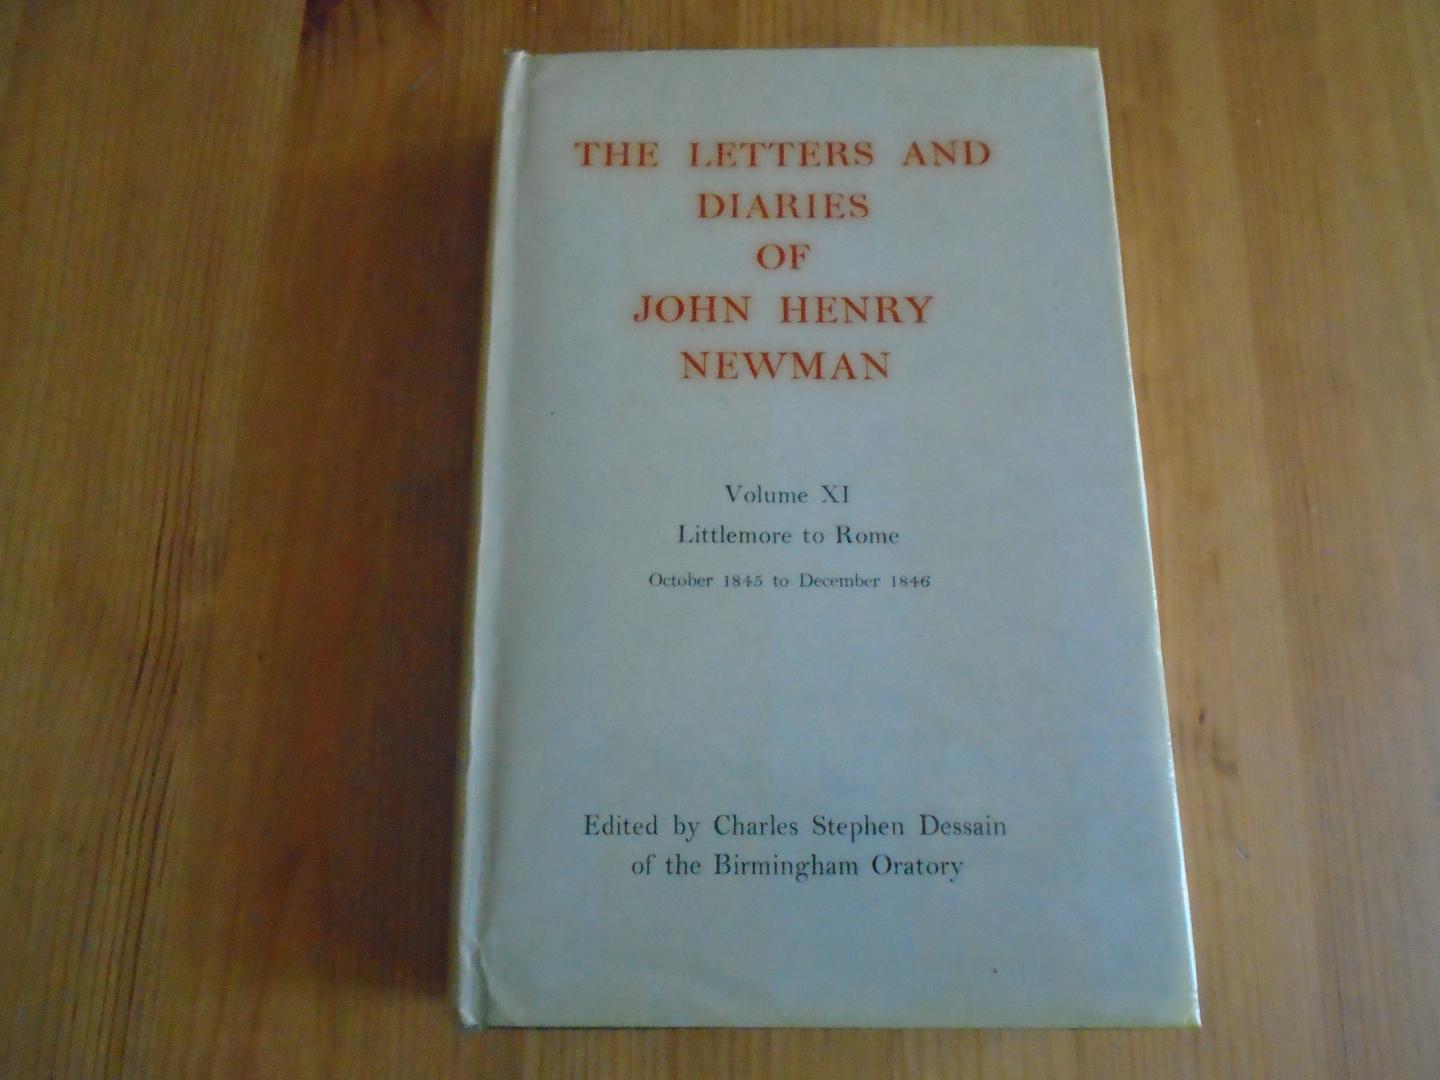 Newman, John Henry - The Letters and Diaries of John Henry Newman, Volume XI: Littlemore to Rome